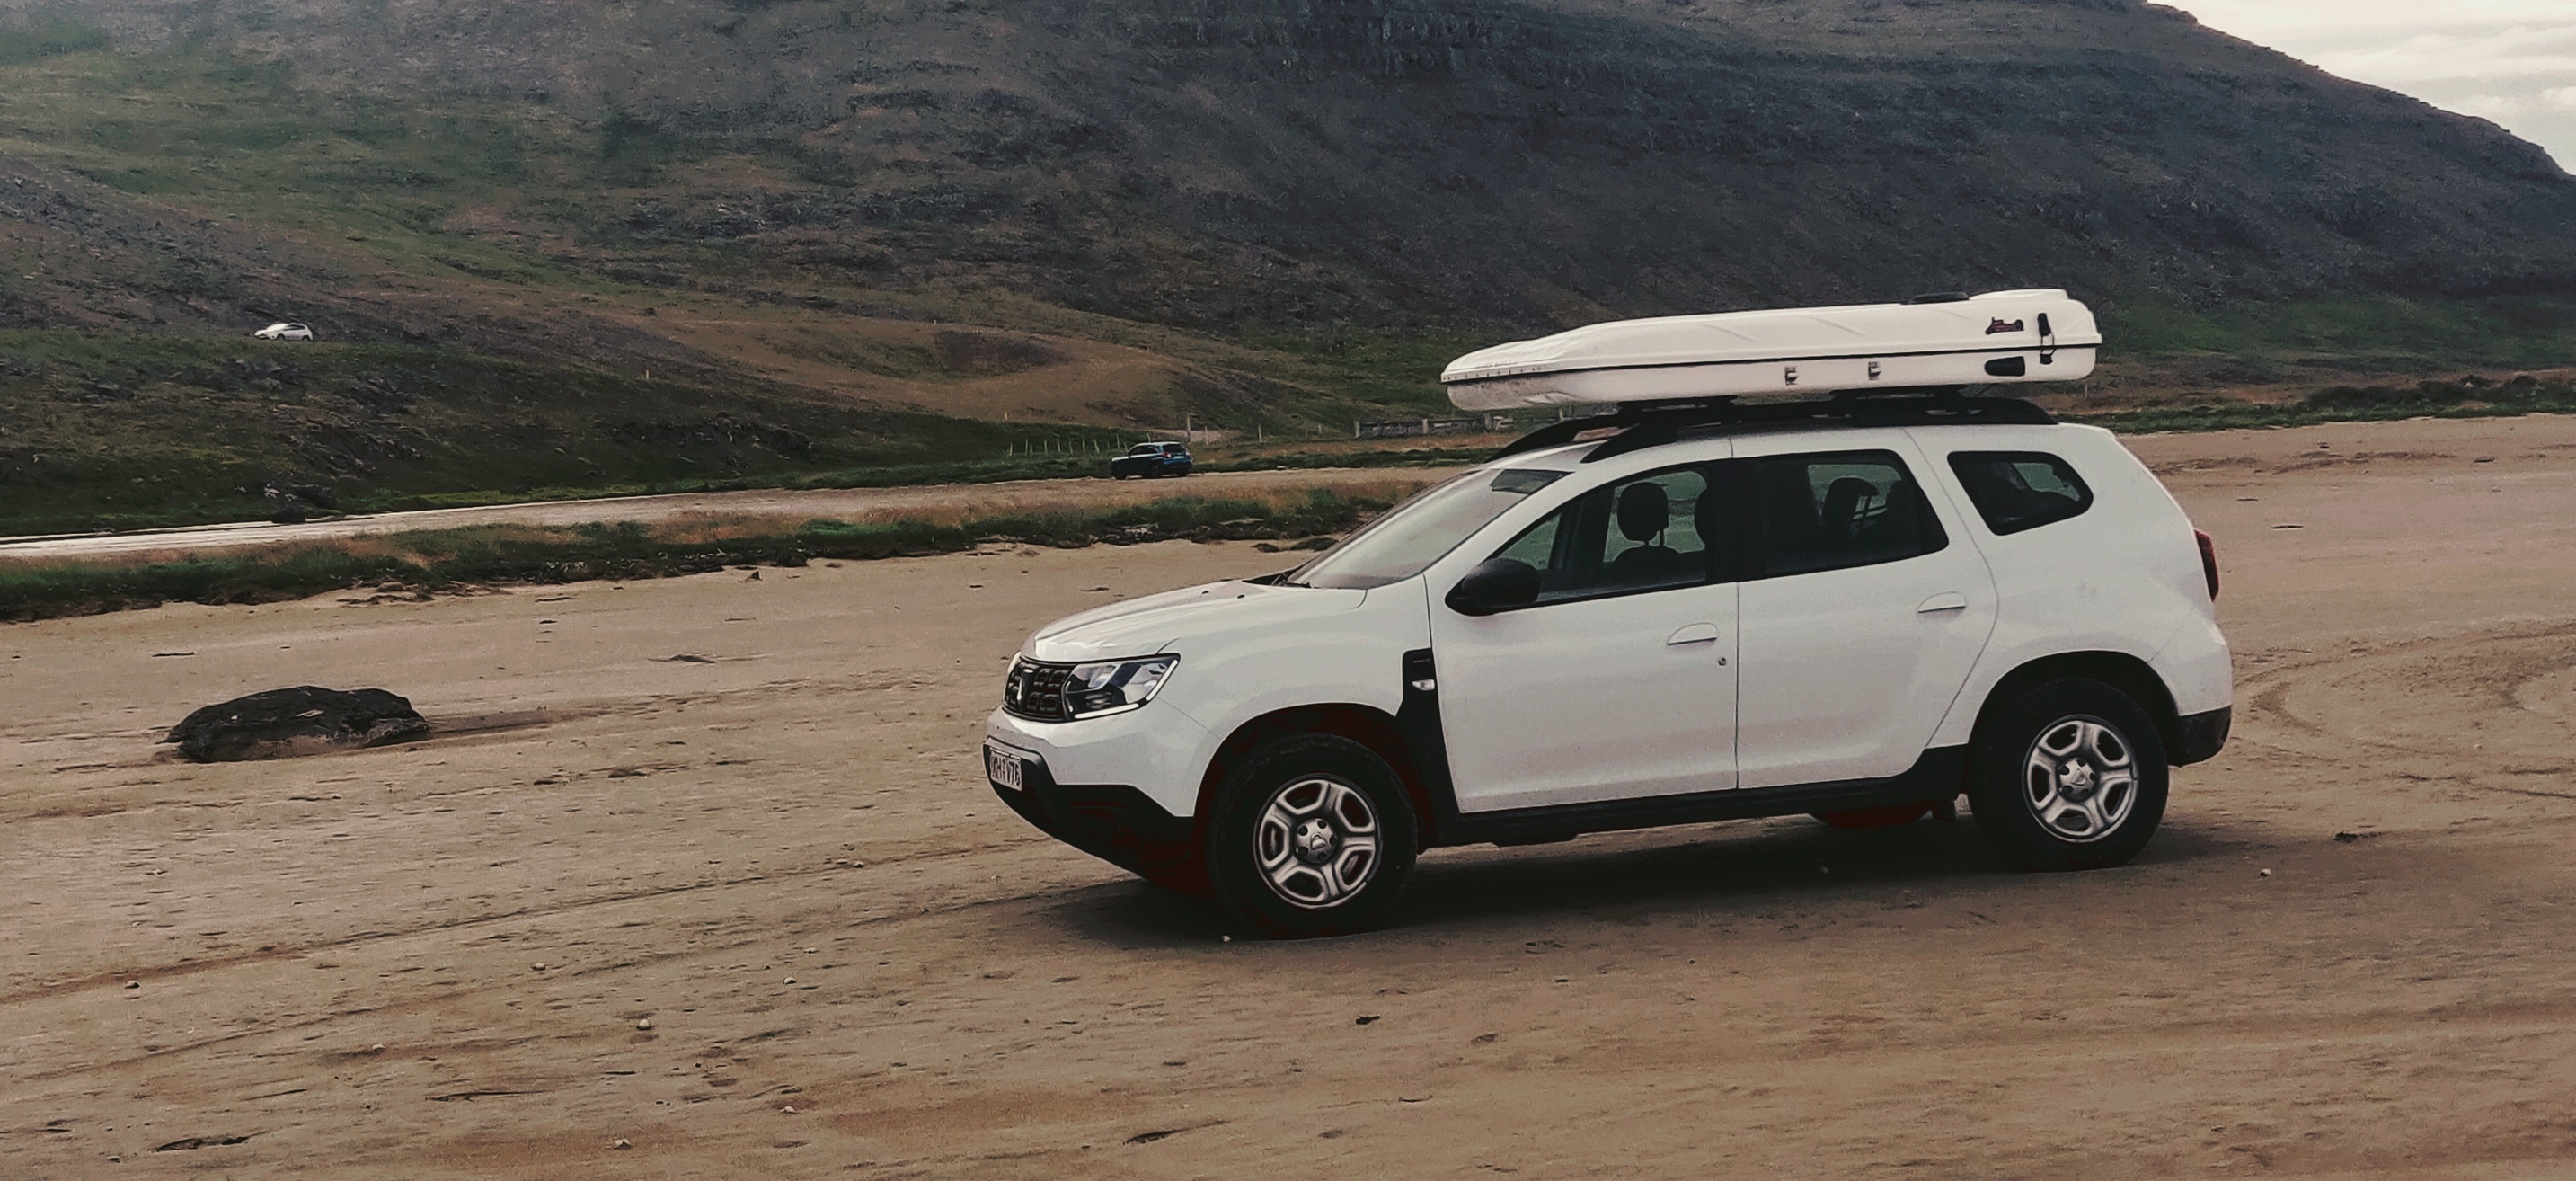 Dacia Duster with roof tent in wetfjords iceland